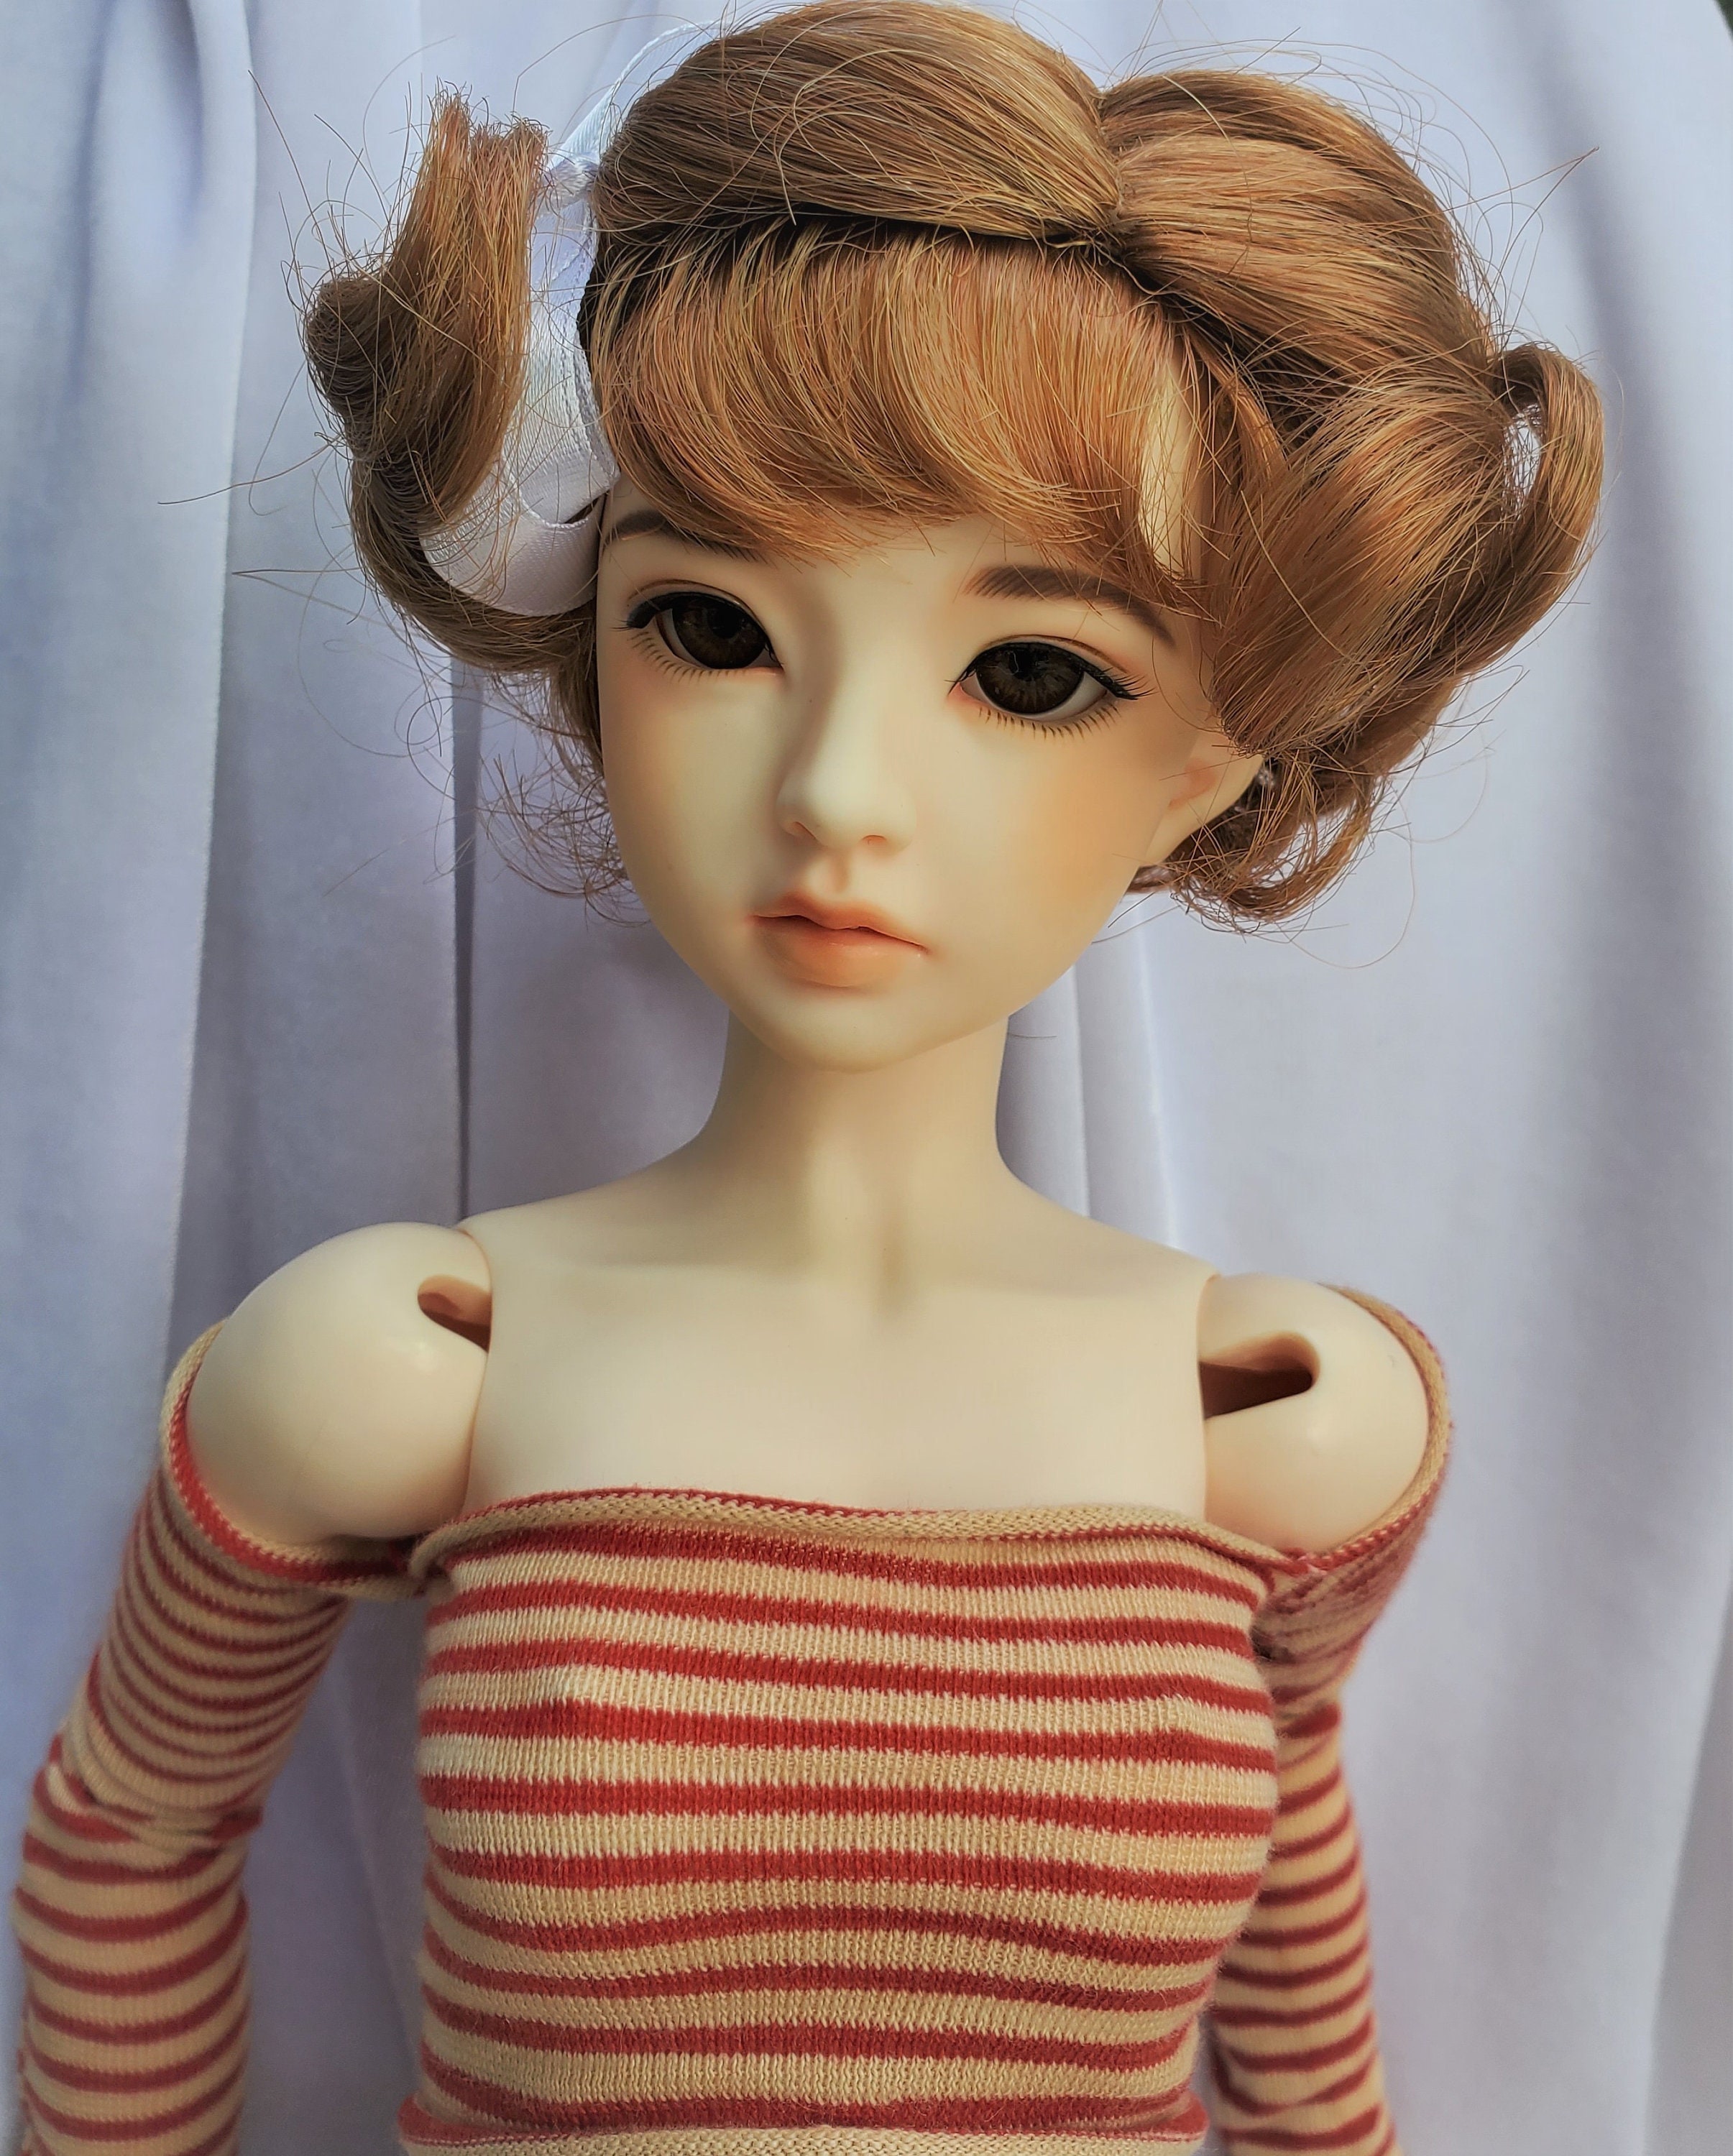 Monique Doll Wig Size 8 9 Kayla In 2 Colors Etsy